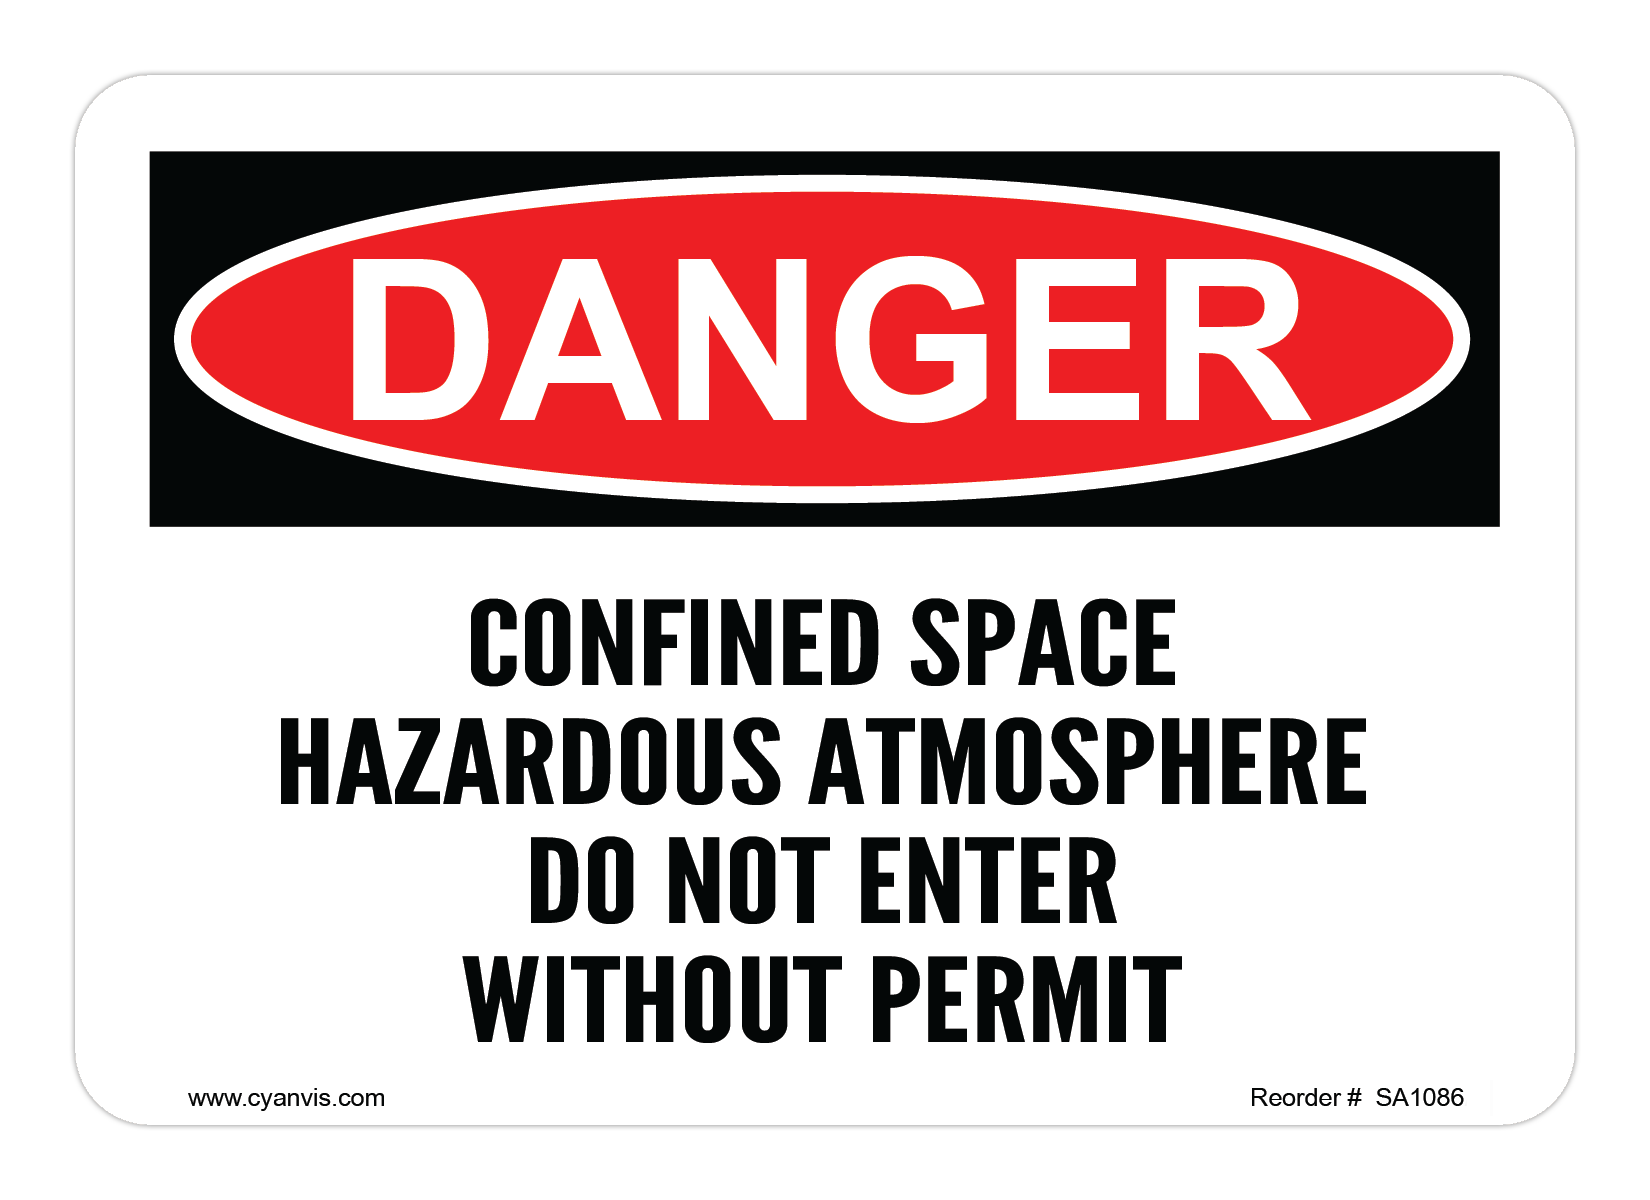 Safety Sign: Danger - CONFINED SPACE HAZARDOUS ATMOSPHERE DO NOT ENTER WITHOUT PERMIT - CYANvisuals